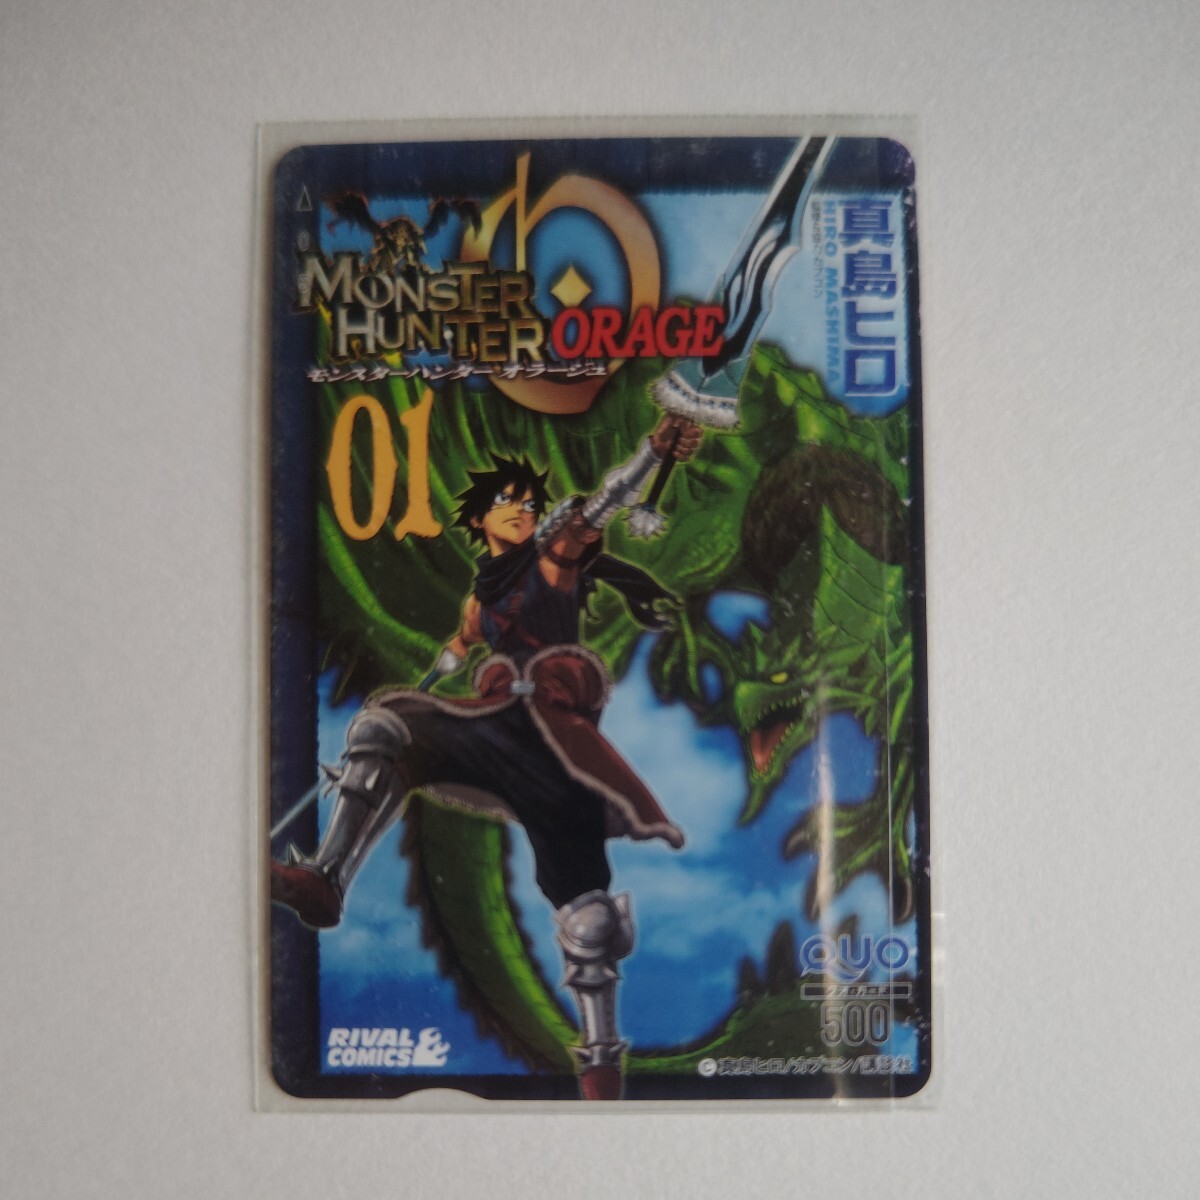  Monstar Hunter o Large .QUO card . pre elected goods / QUO card 